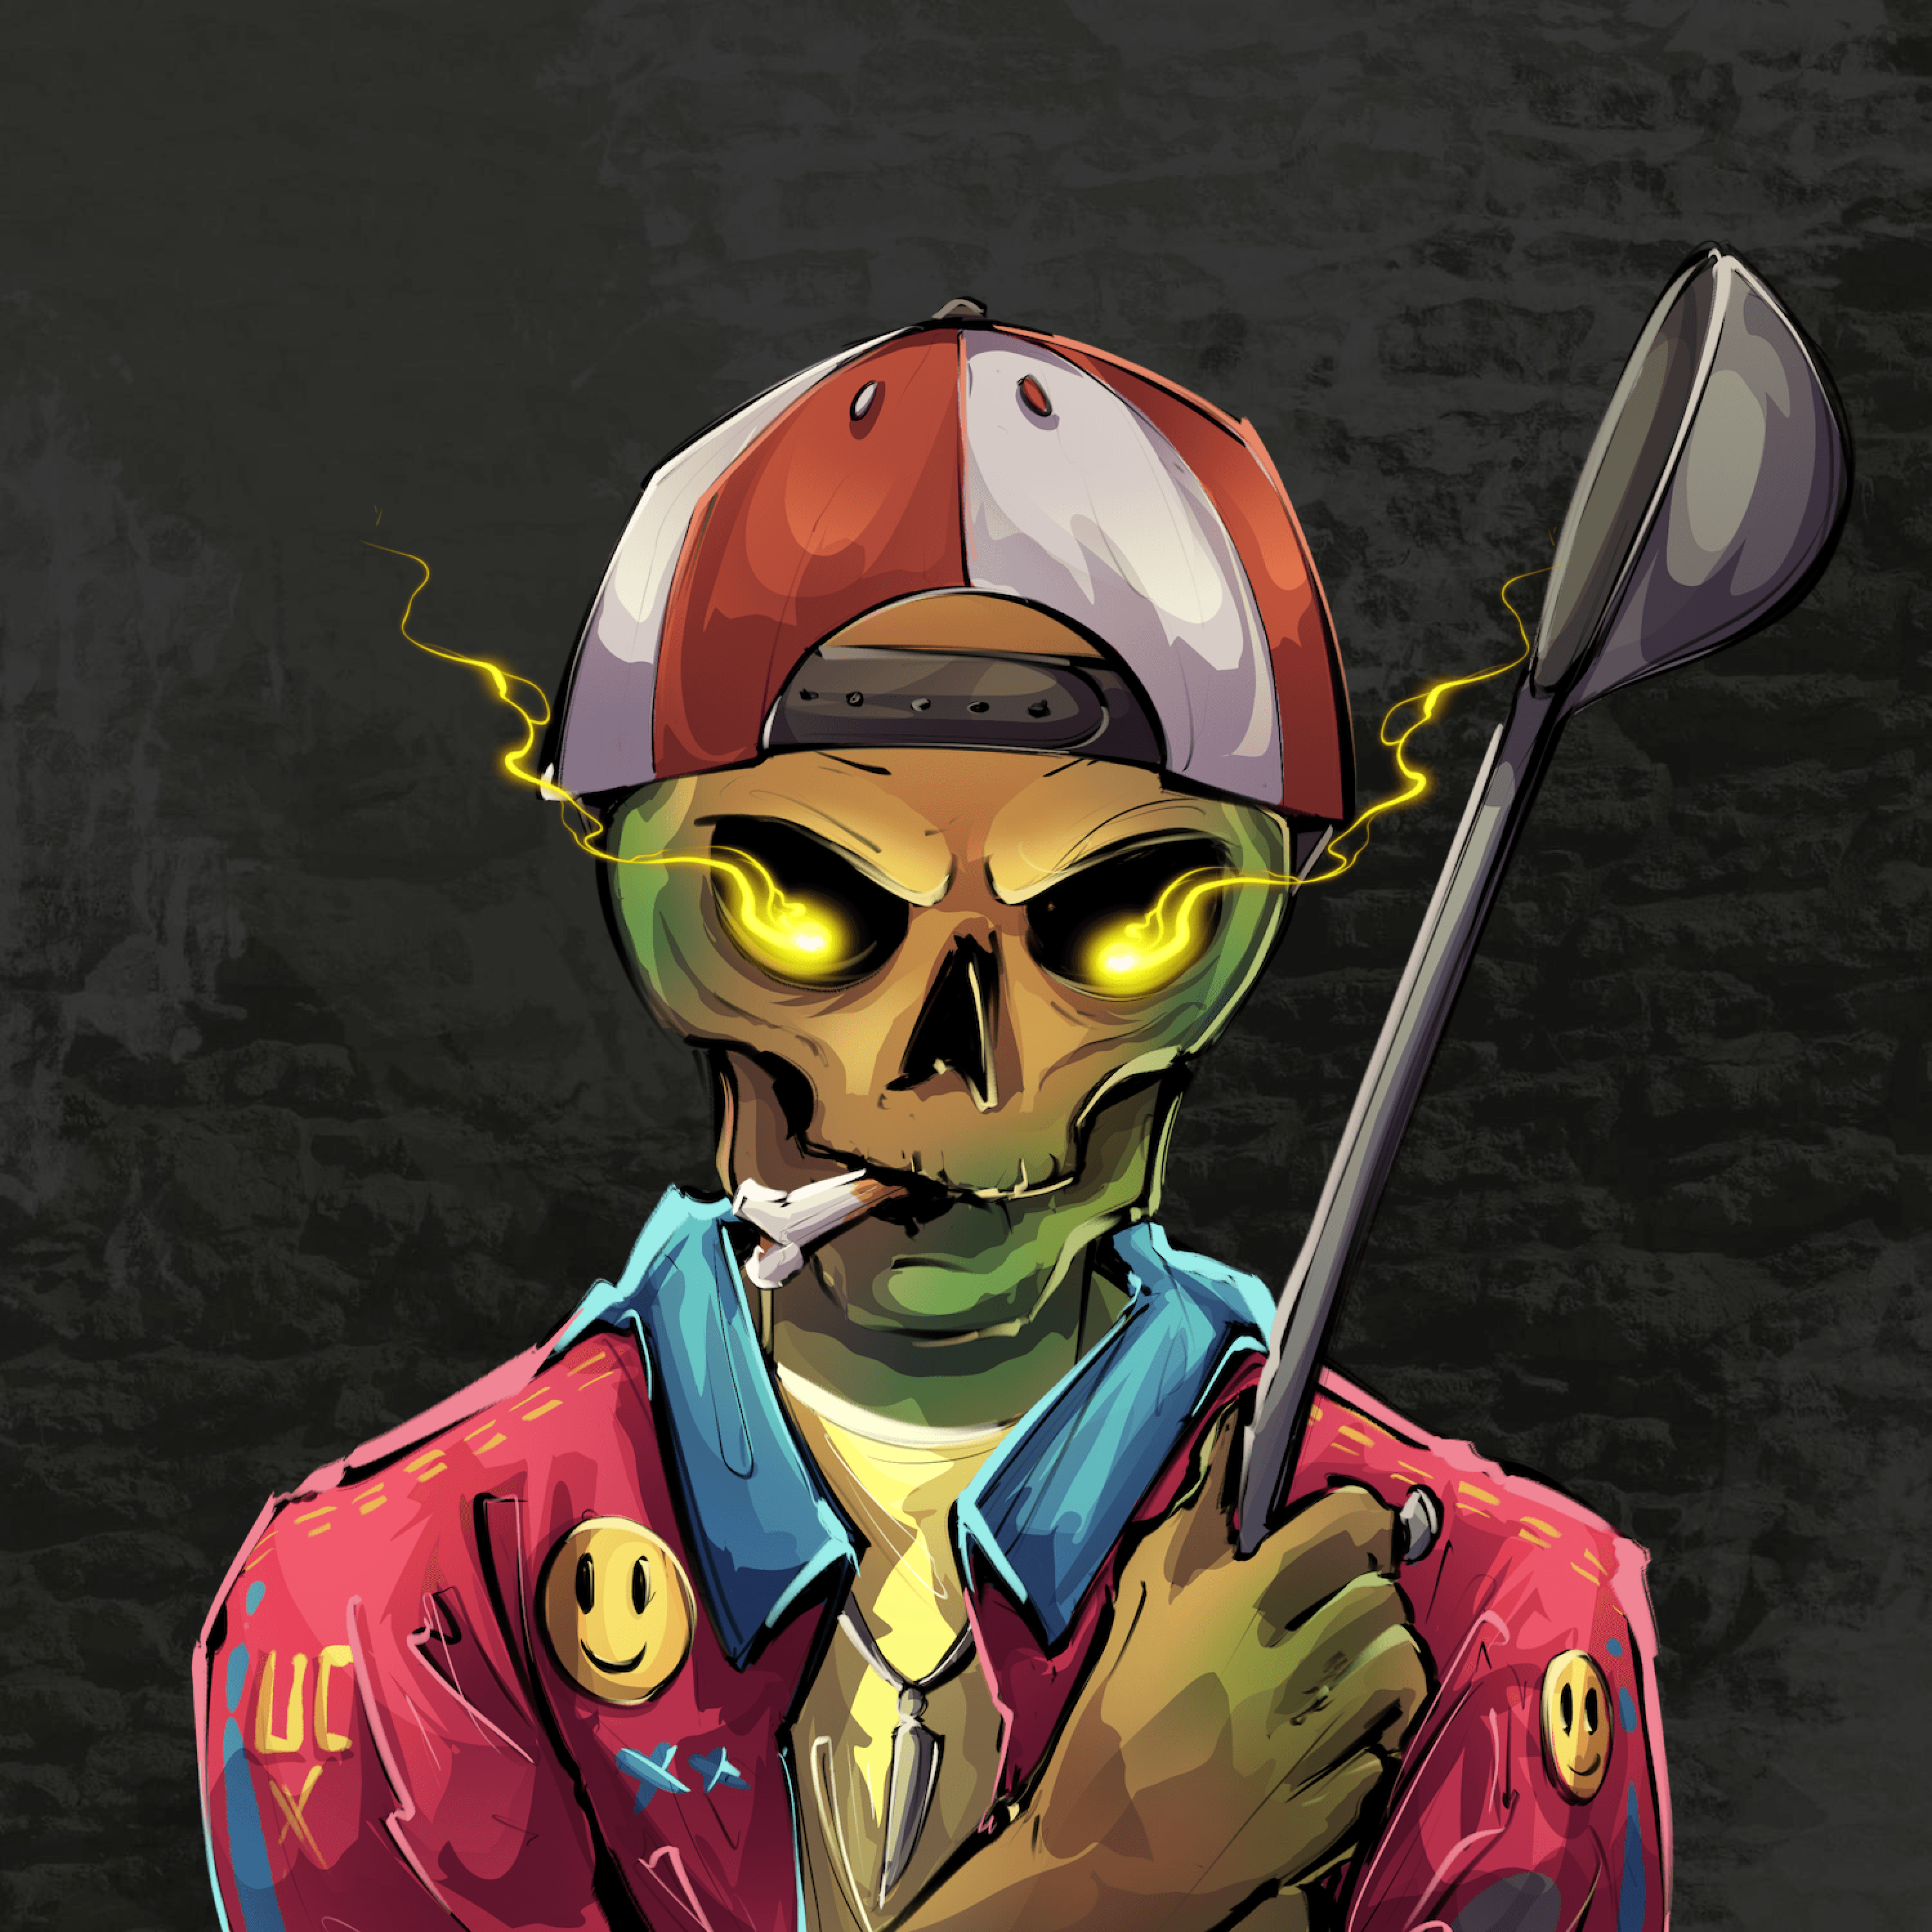 Undead Chefs #3562